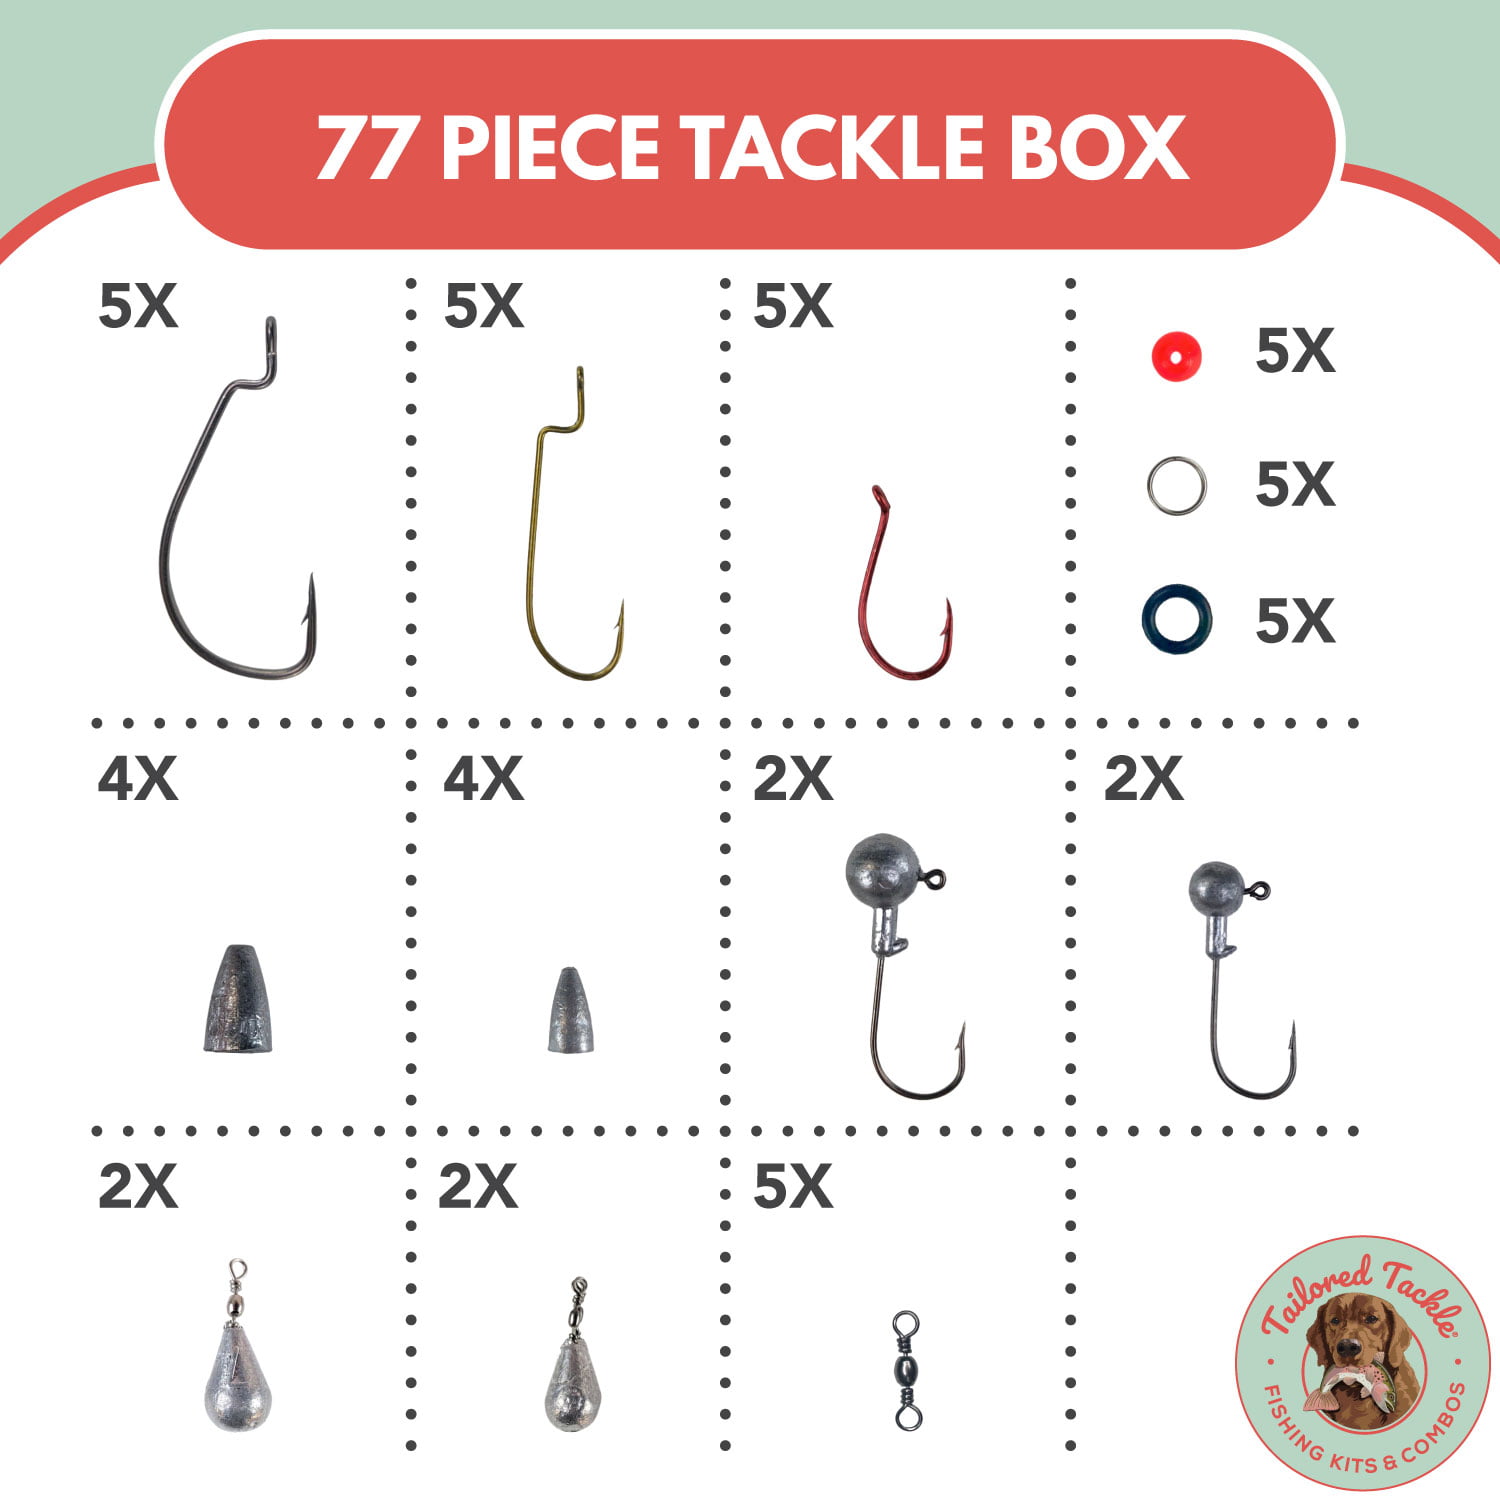 Tailored Tackle Trout Fishing Kit 77 Pc Tackle Box with Tackle